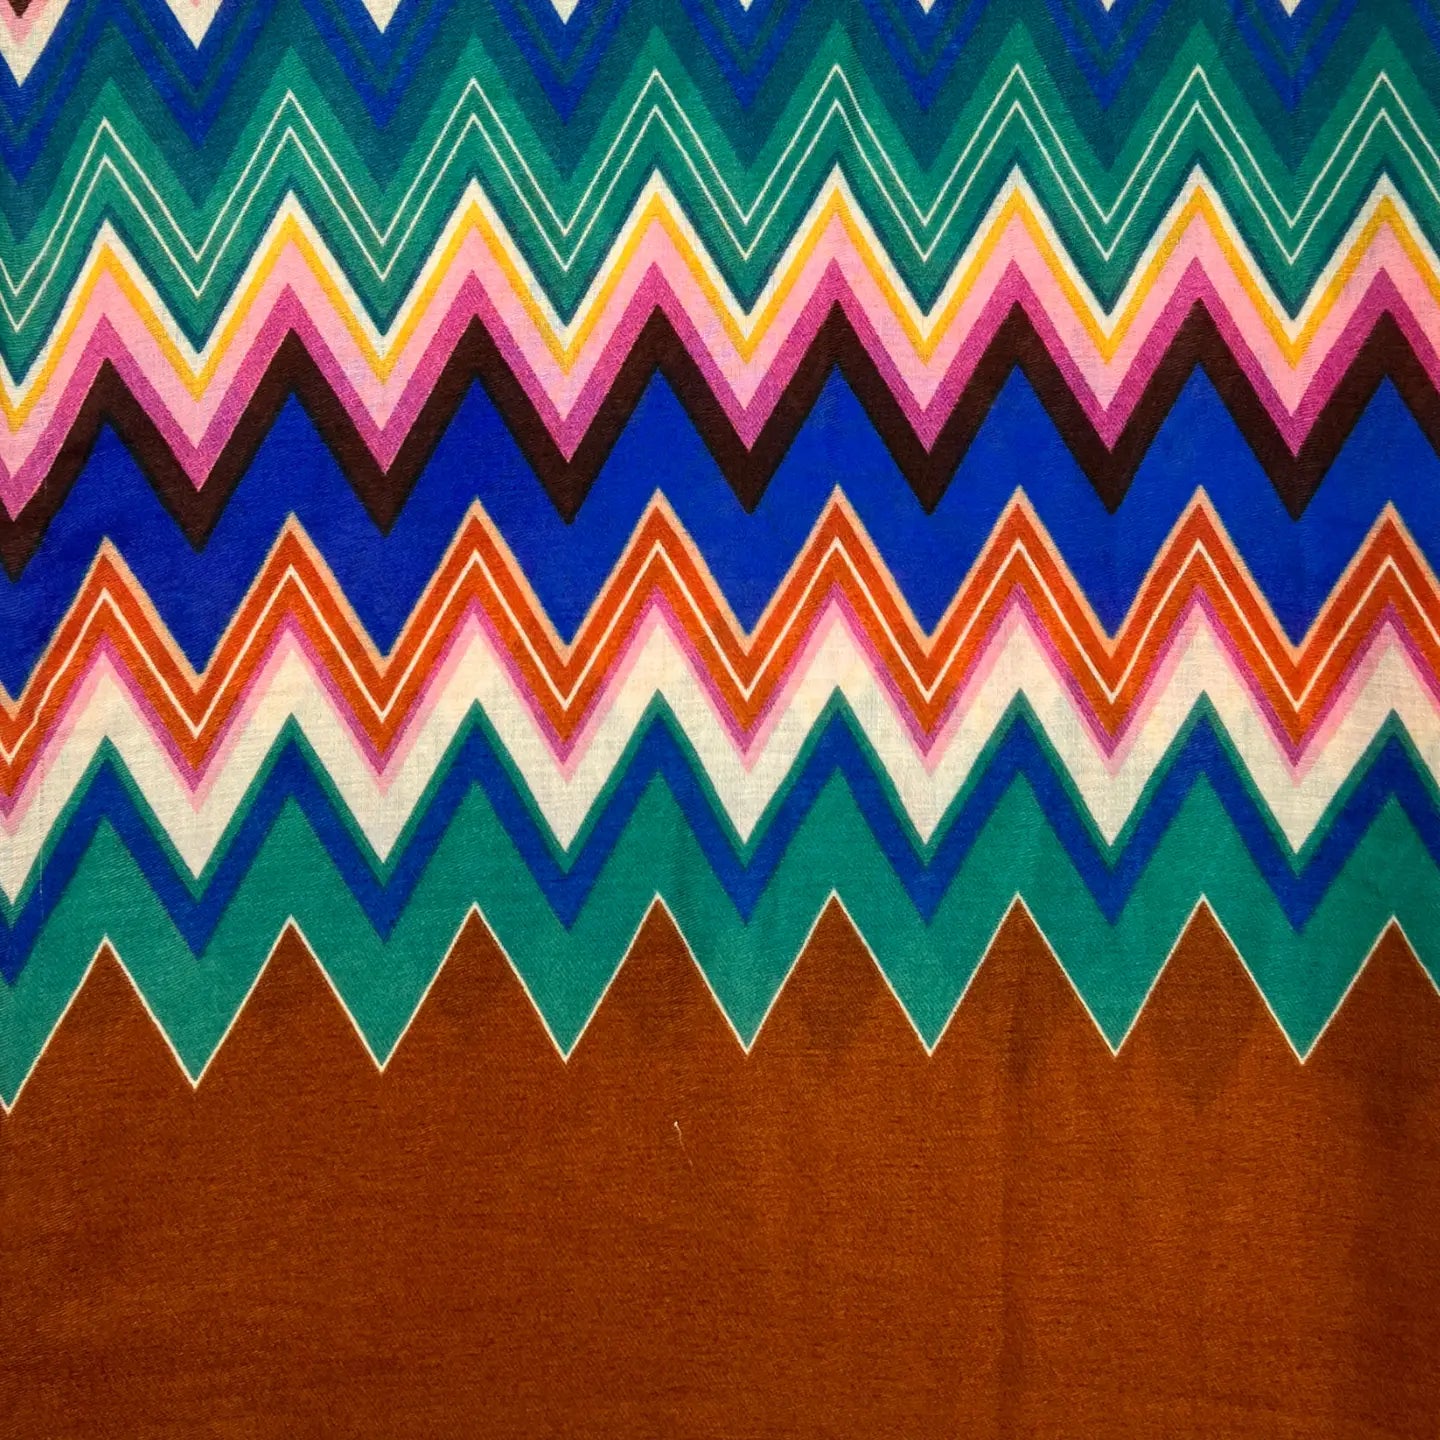 Zigzag colourful scarf - brown